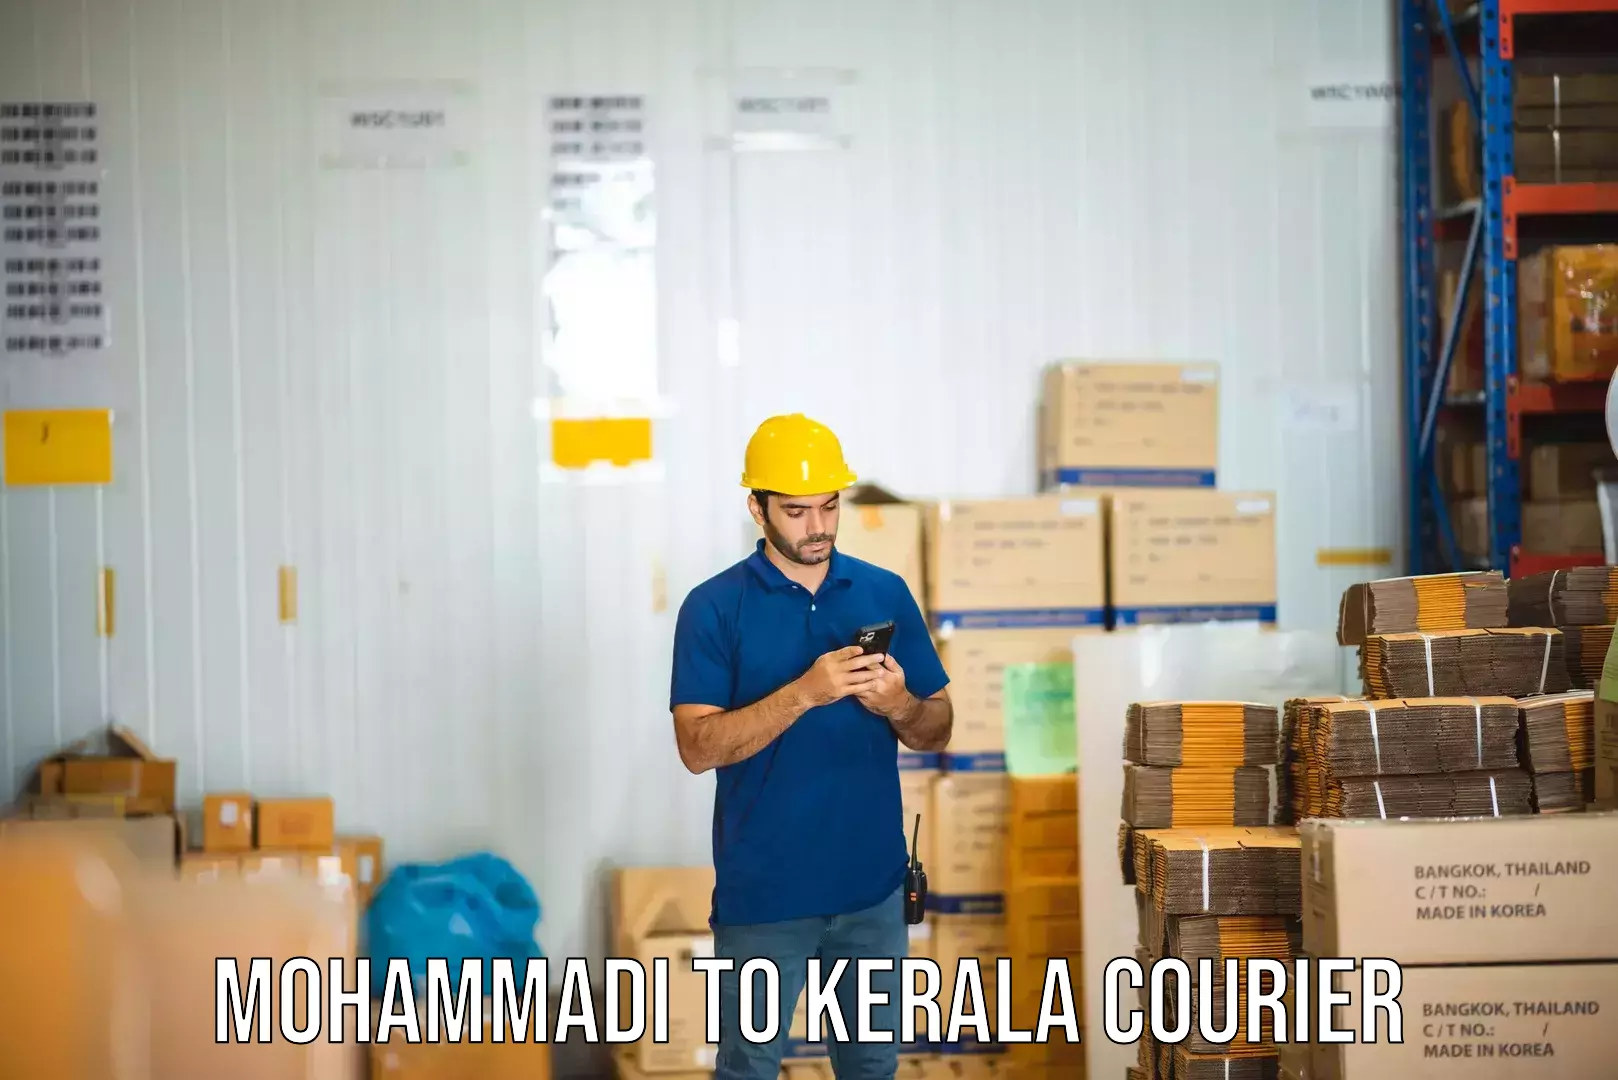 Express mail service in Mohammadi to Kerala